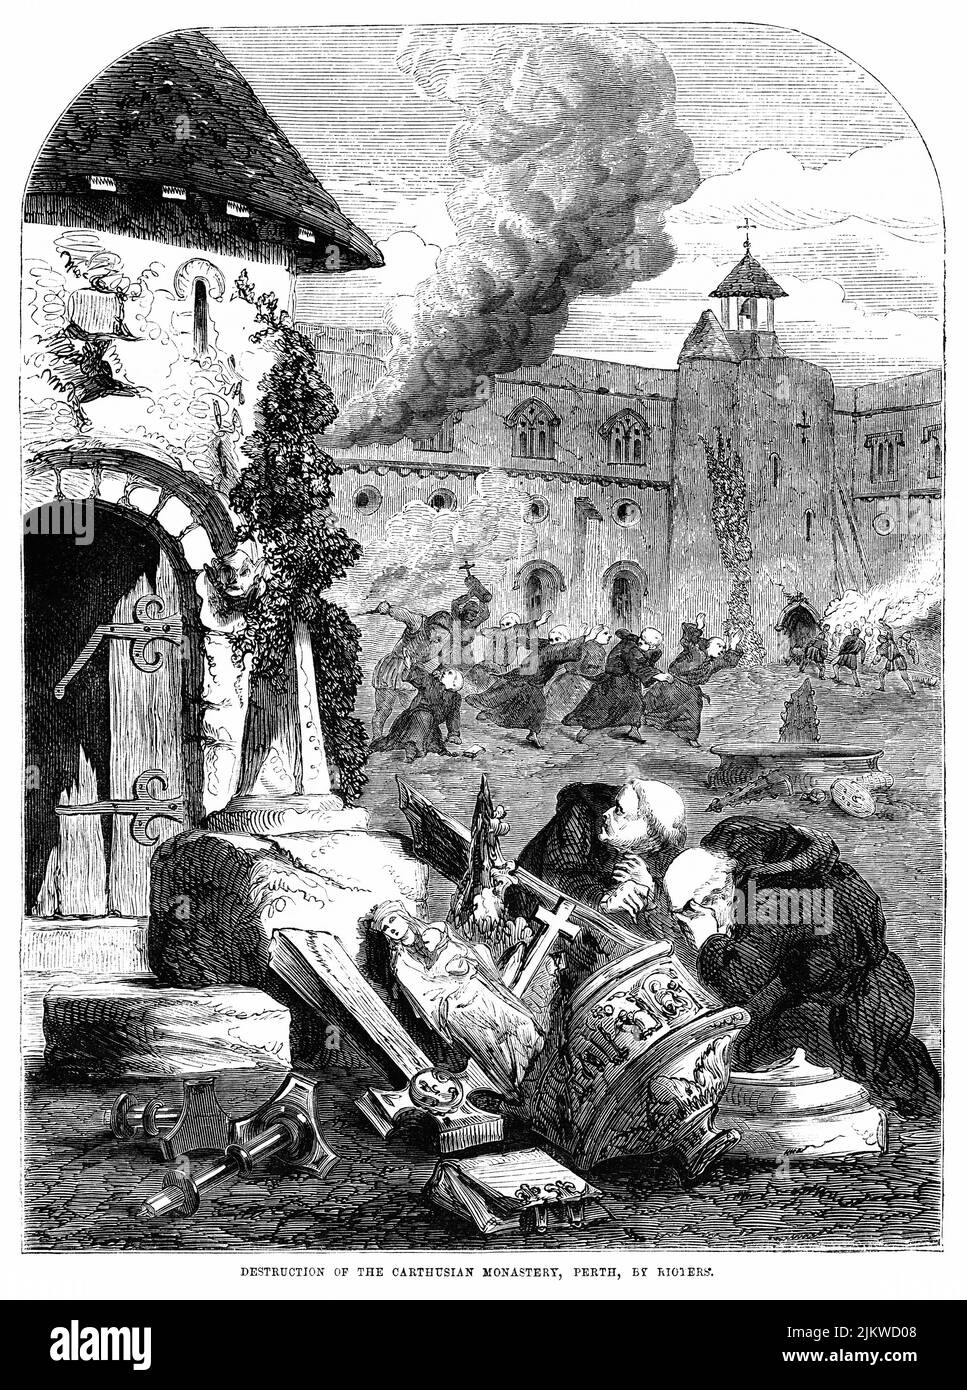 Destruction of the Carthusian Monastery, Perth, by Rioters, Illustration from the Book, 'John Cassel’s Illustrated History of England, Volume II', text by William Howitt, Cassell, Petter, and Galpin, London, 1858 Stock Photo